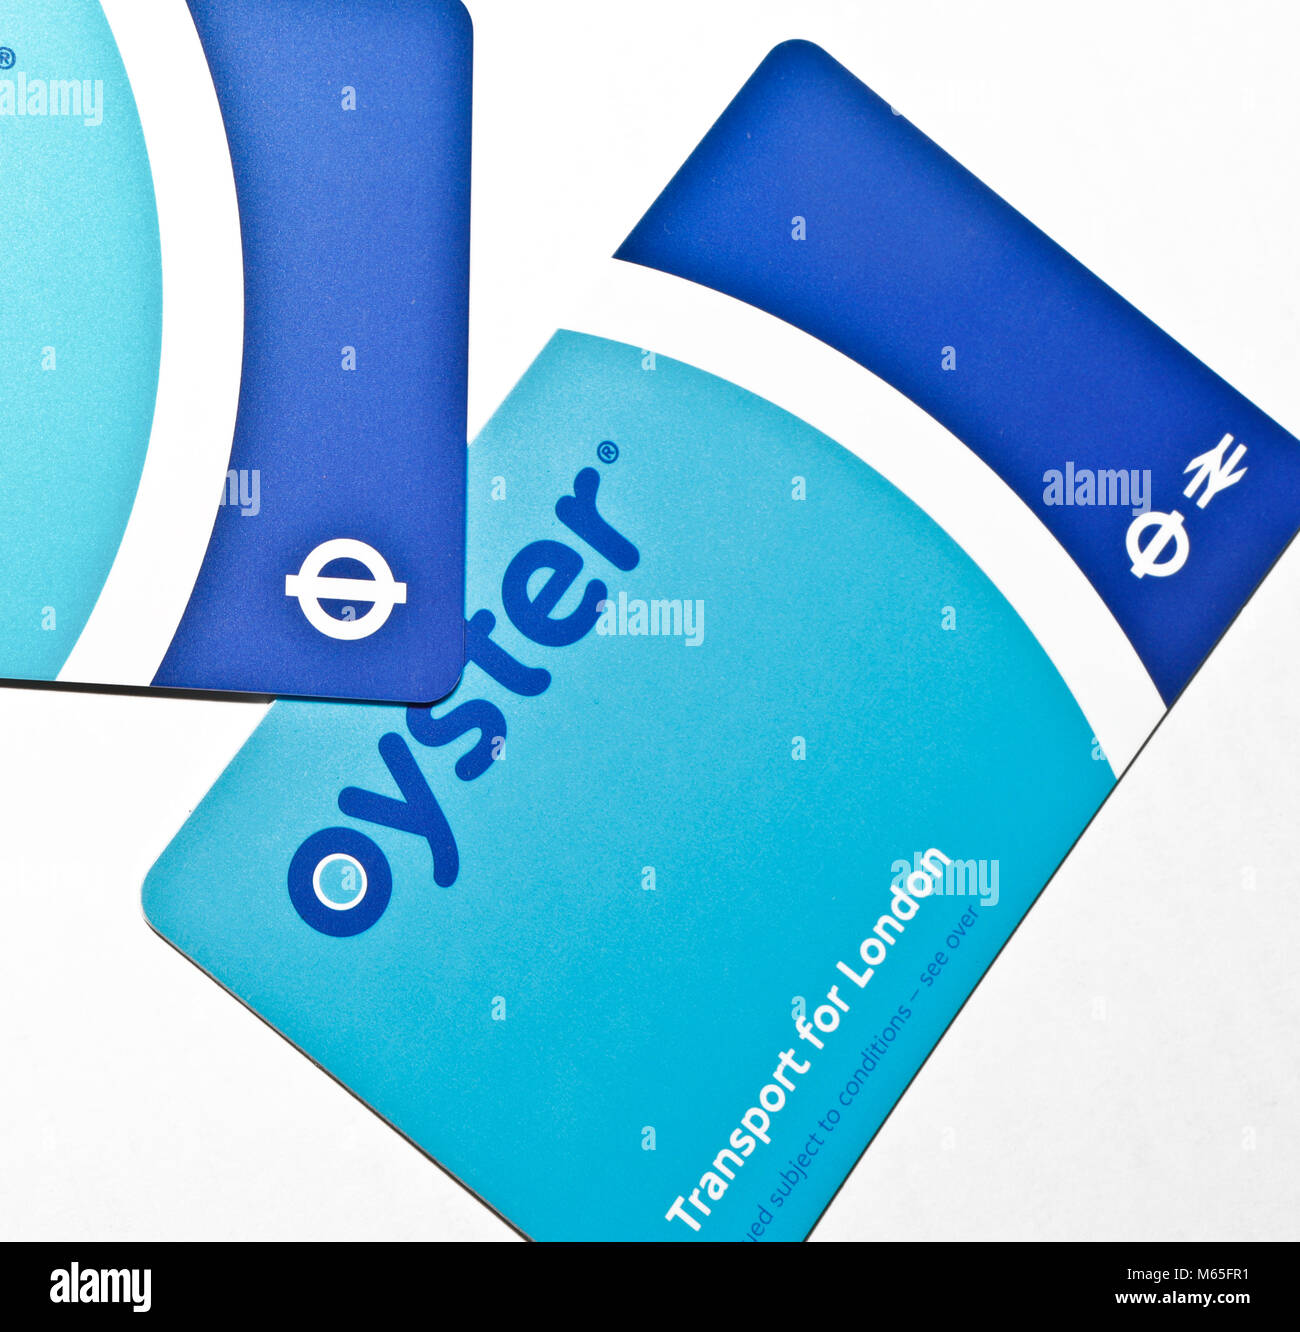 Oyster card for transportation in London isolated on white Stock Photo